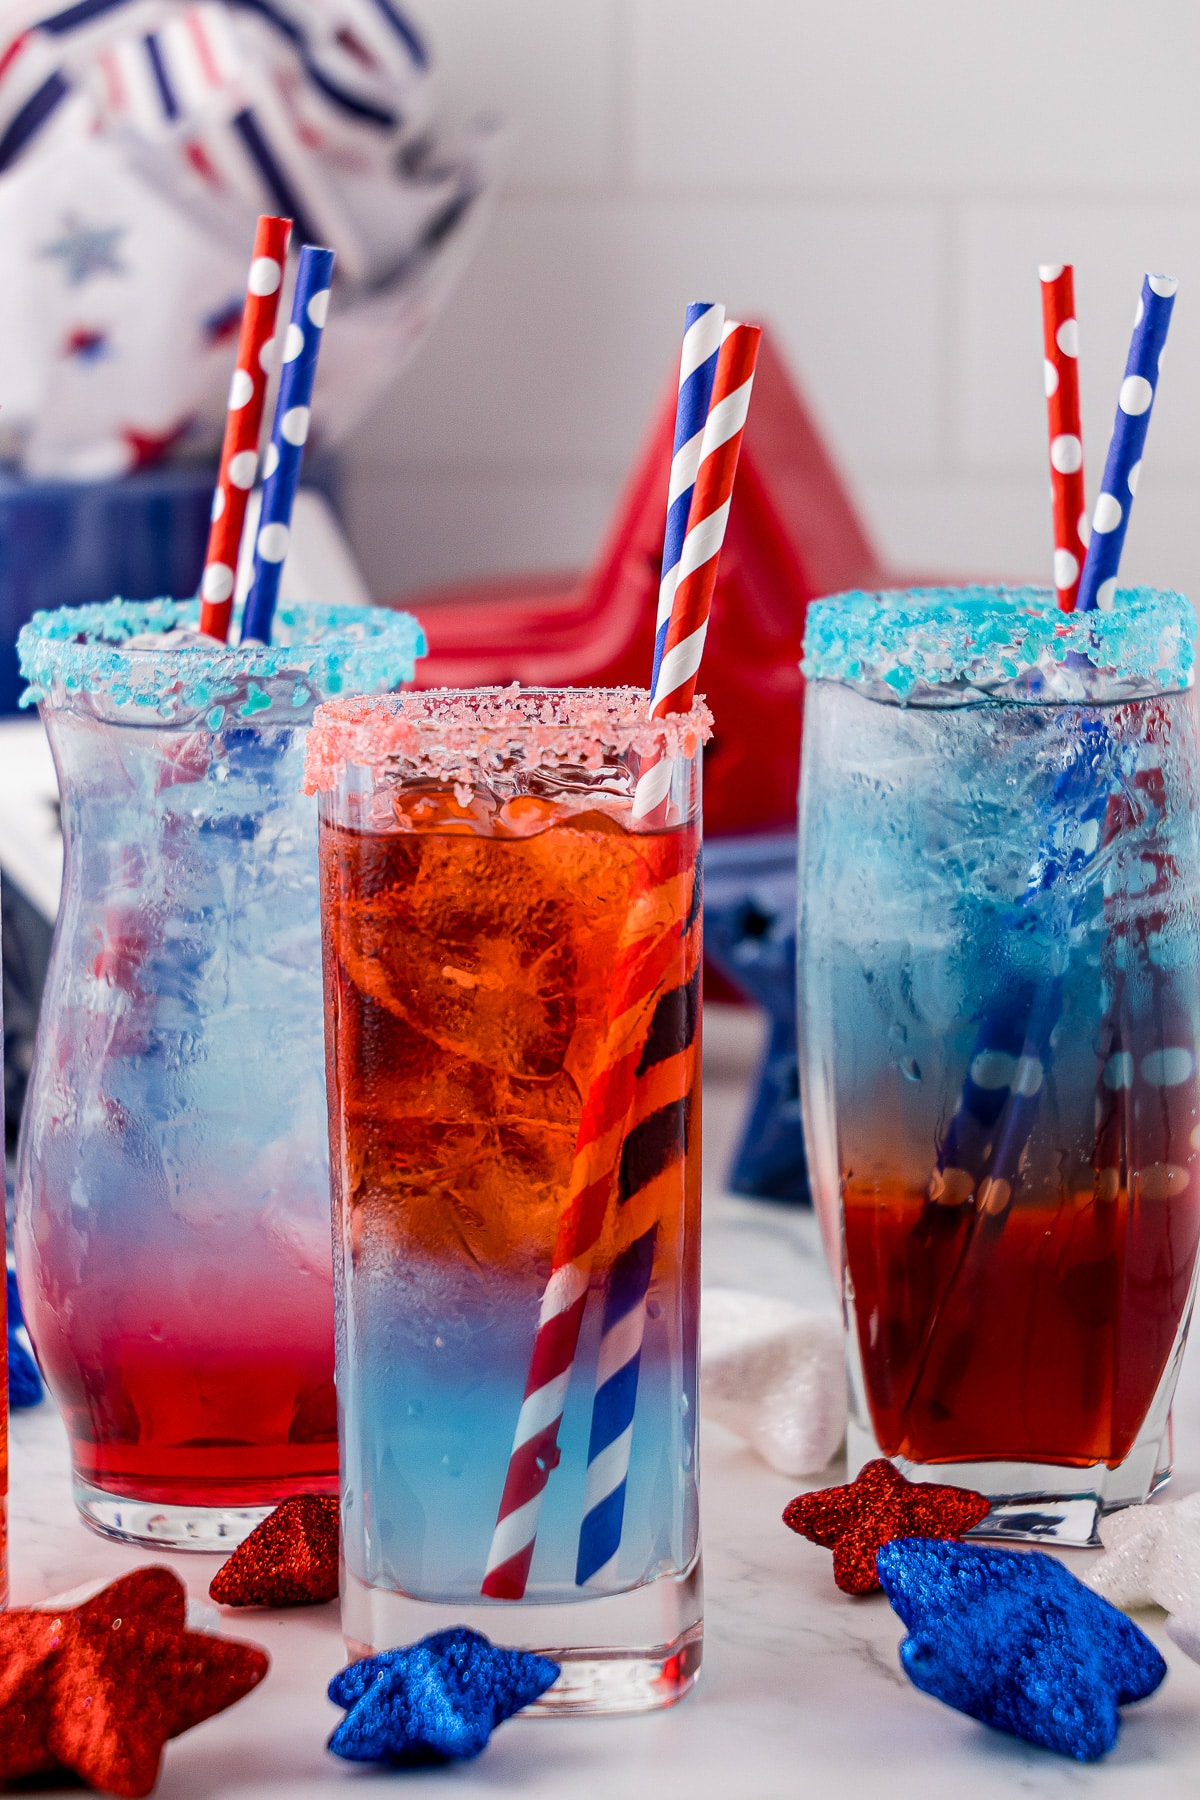 Three tall thin glasses with a red, white and blue layered drink; two with red at the bottom and one with blue at the bottom. All with two straws and each with pop rock like candy around the entire rim of glass